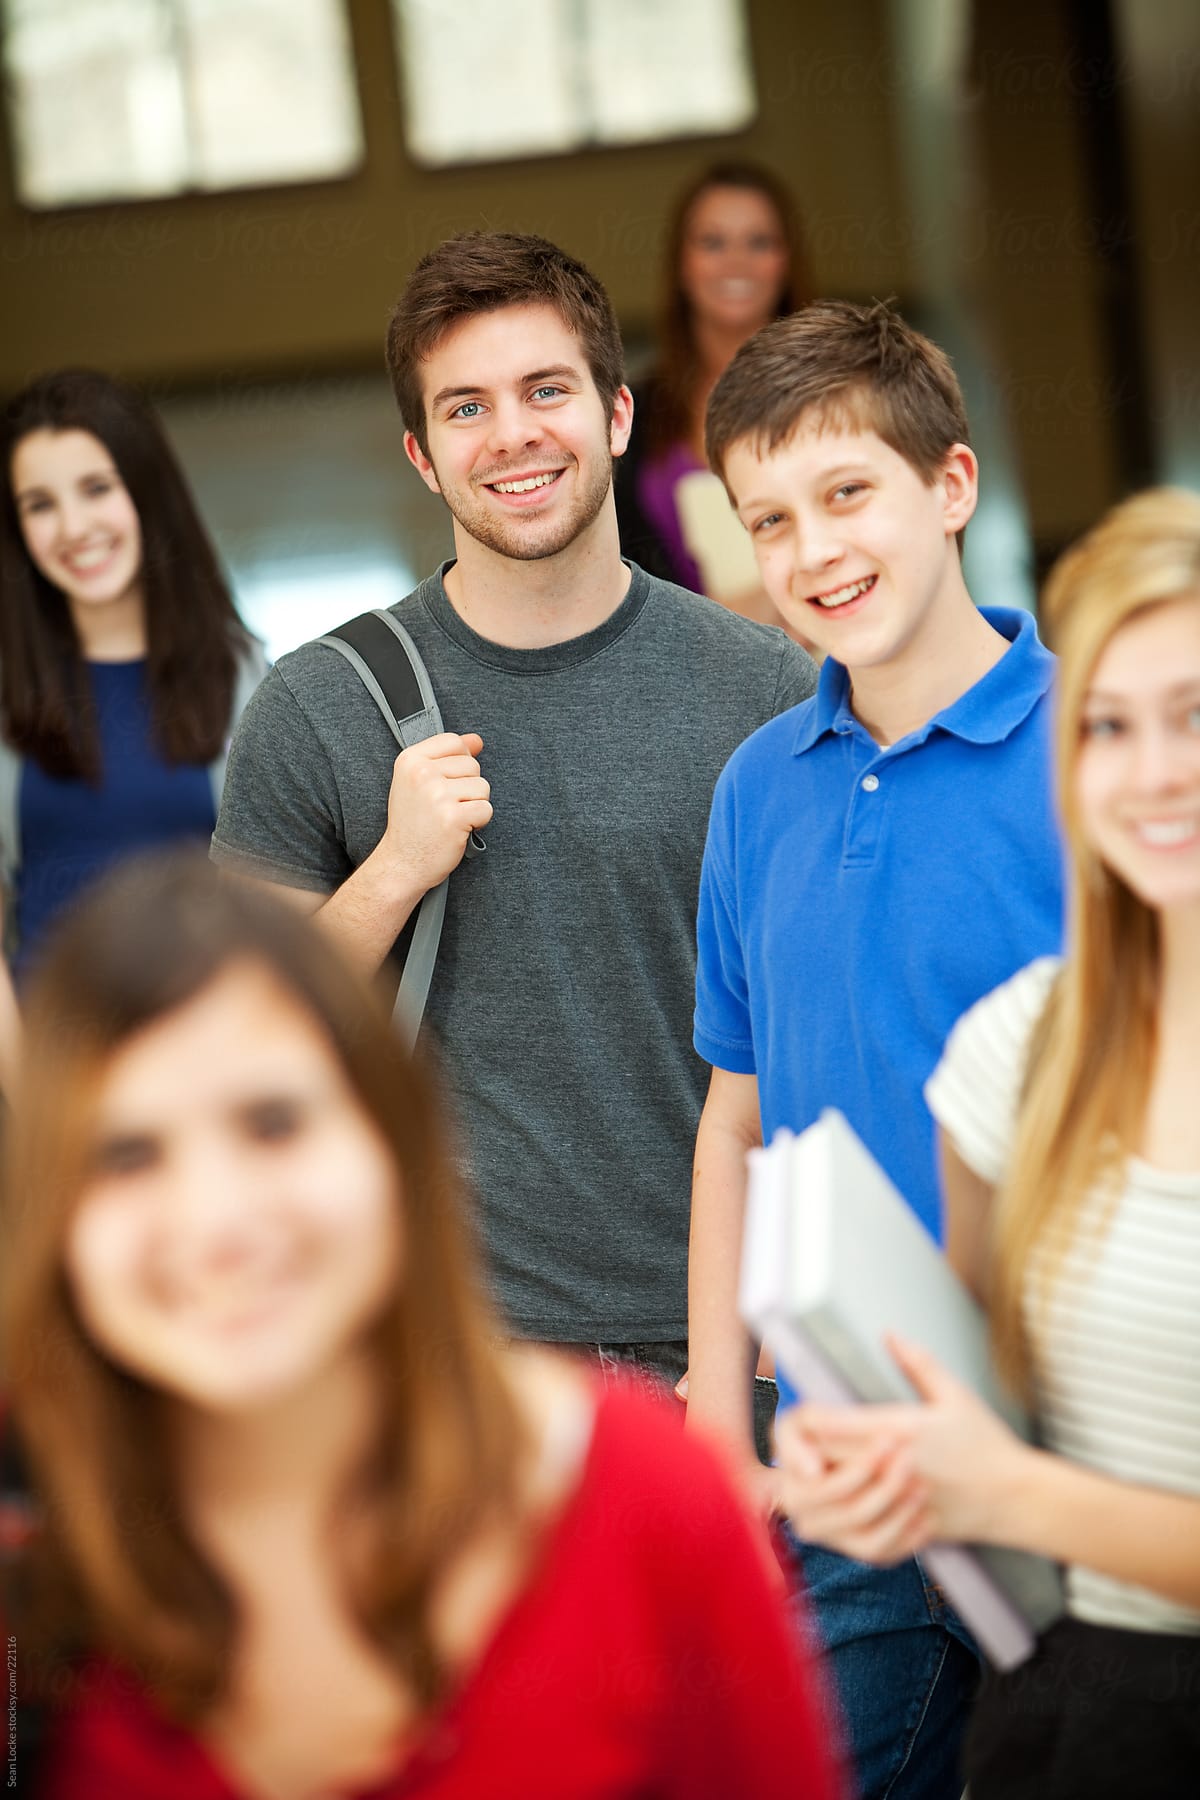 High School: Cool Guy Leads Cheerful Crowd of Students